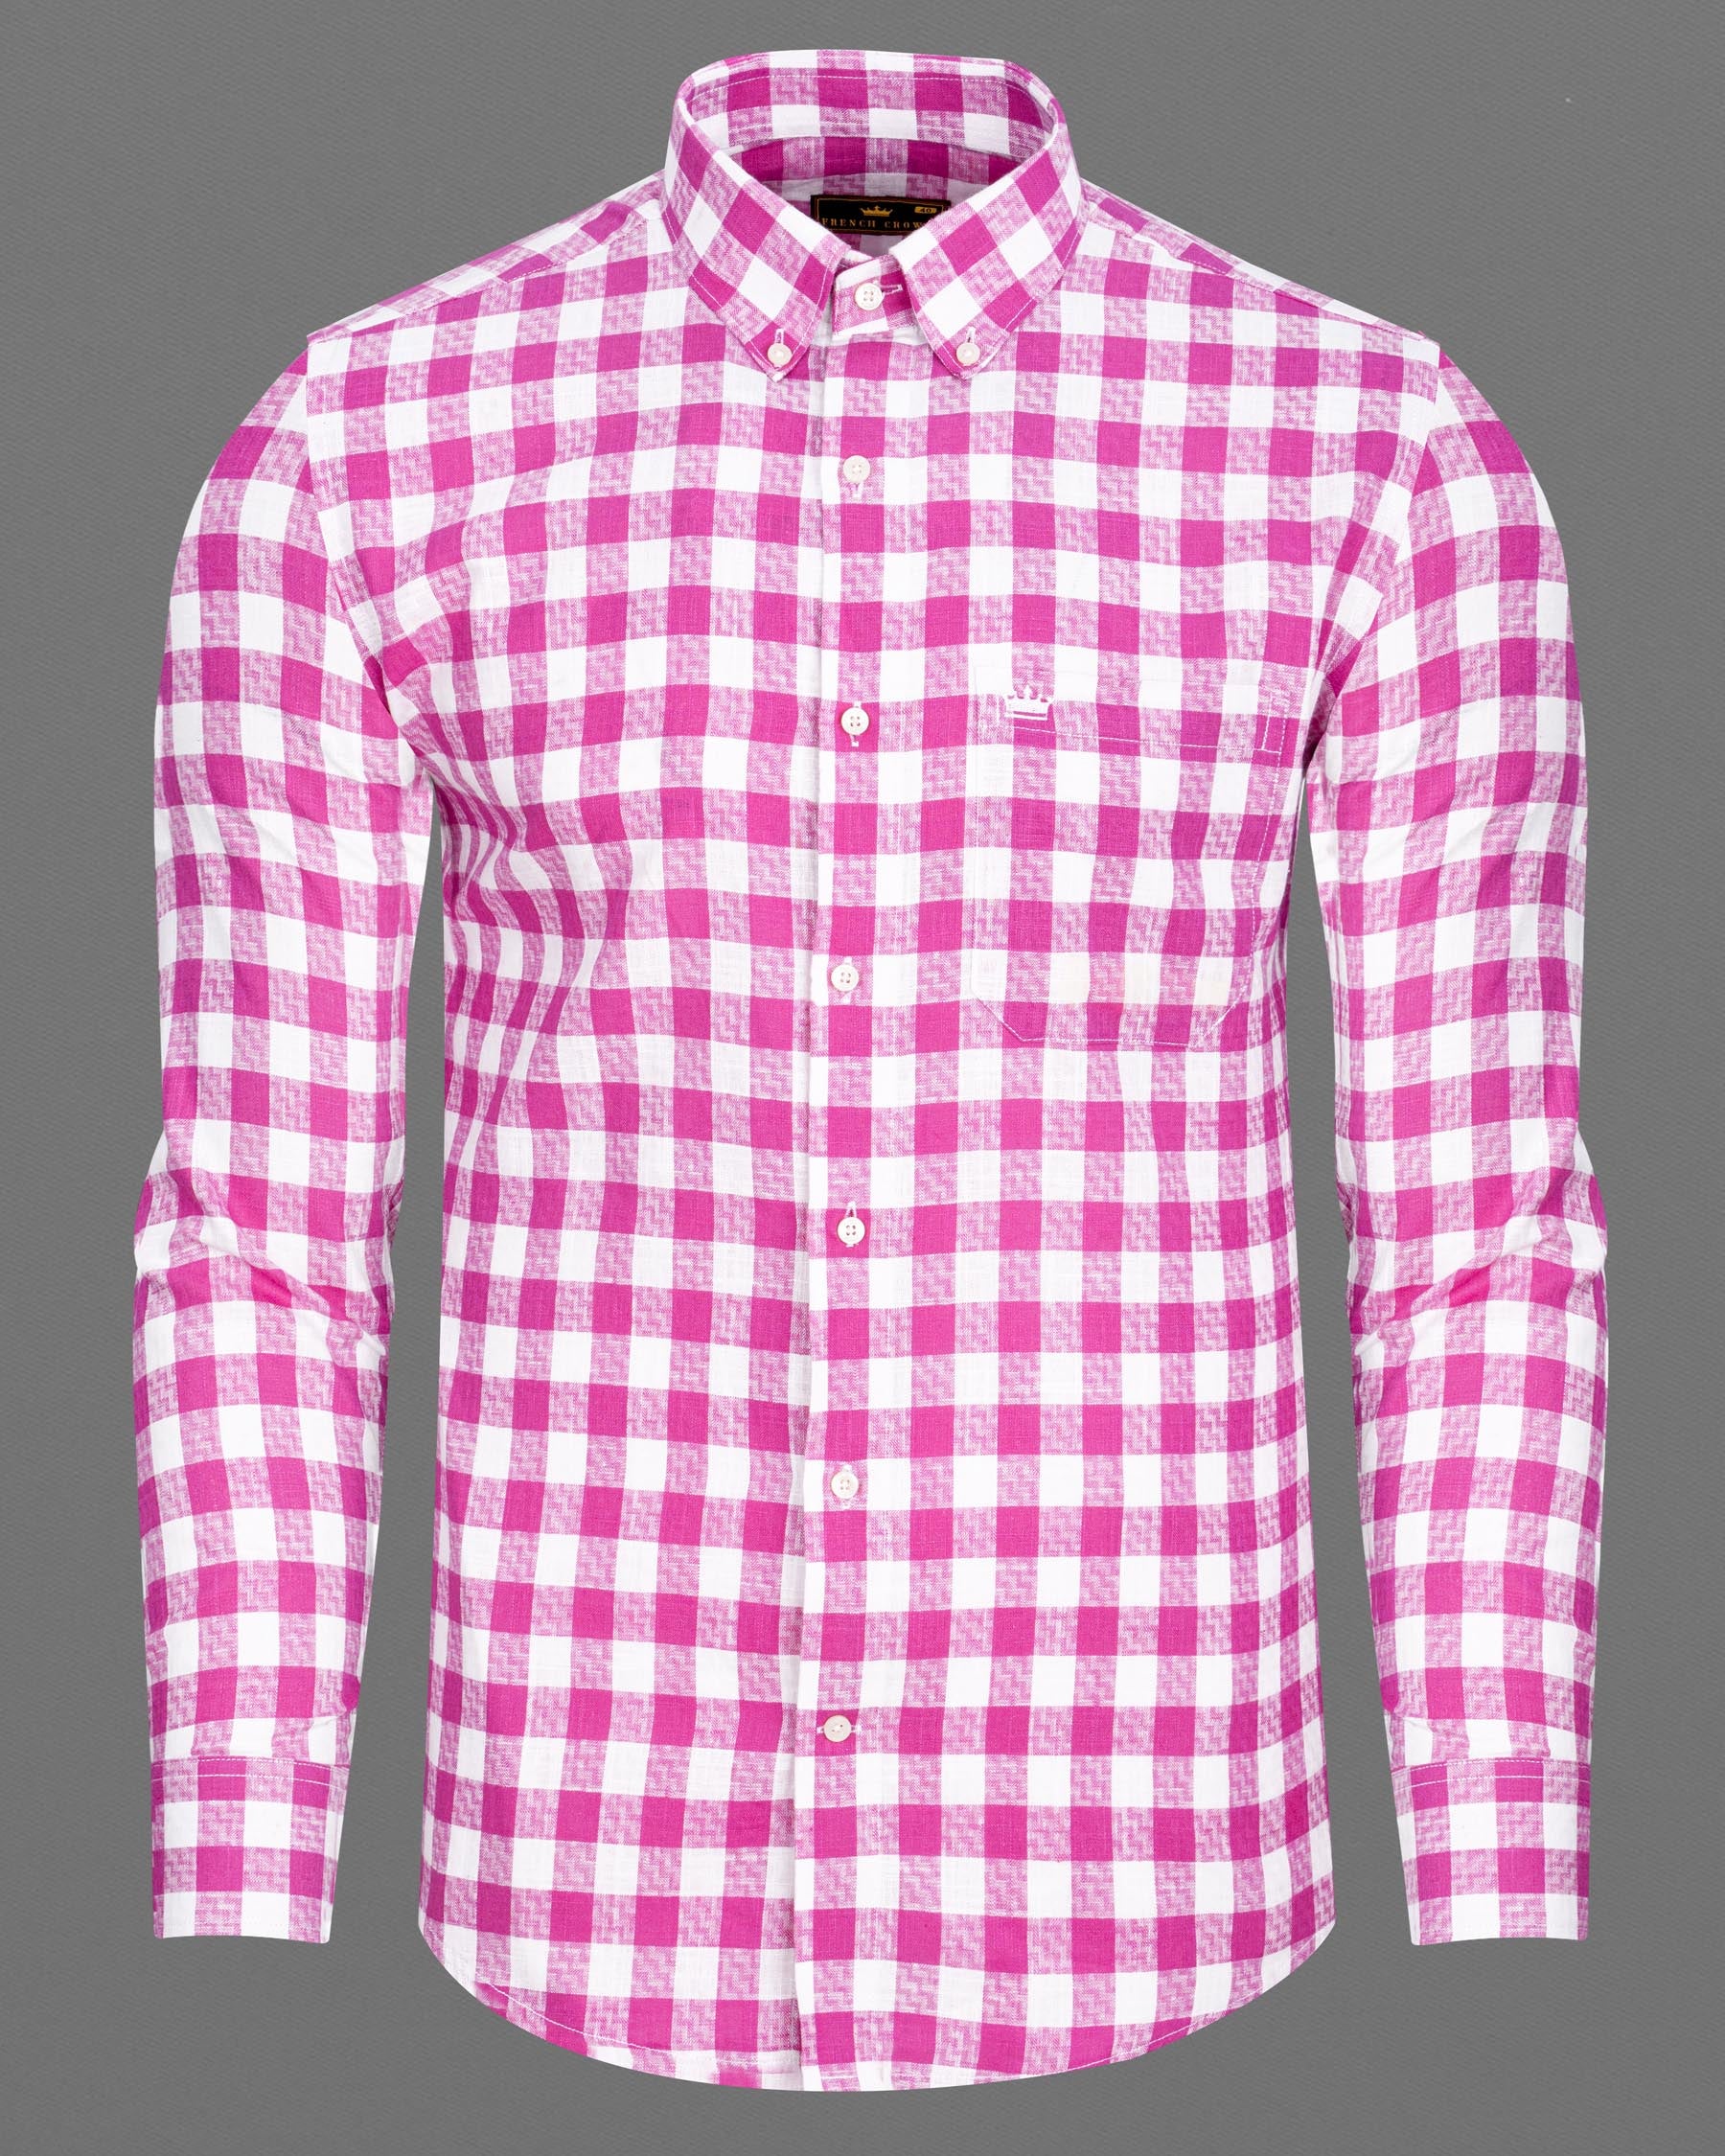 Bright White and Cerise Pink Plaid Twill Premium Cotton Shirt 6927-BD-38,6927-BD-38,6927-BD-39,6927-BD-39,6927-BD-40,6927-BD-40,6927-BD-42,6927-BD-42,6927-BD-44,6927-BD-44,6927-BD-46,6927-BD-46,6927-BD-48,6927-BD-48,6927-BD-50,6927-BD-50,6927-BD-52,6927-BD-52